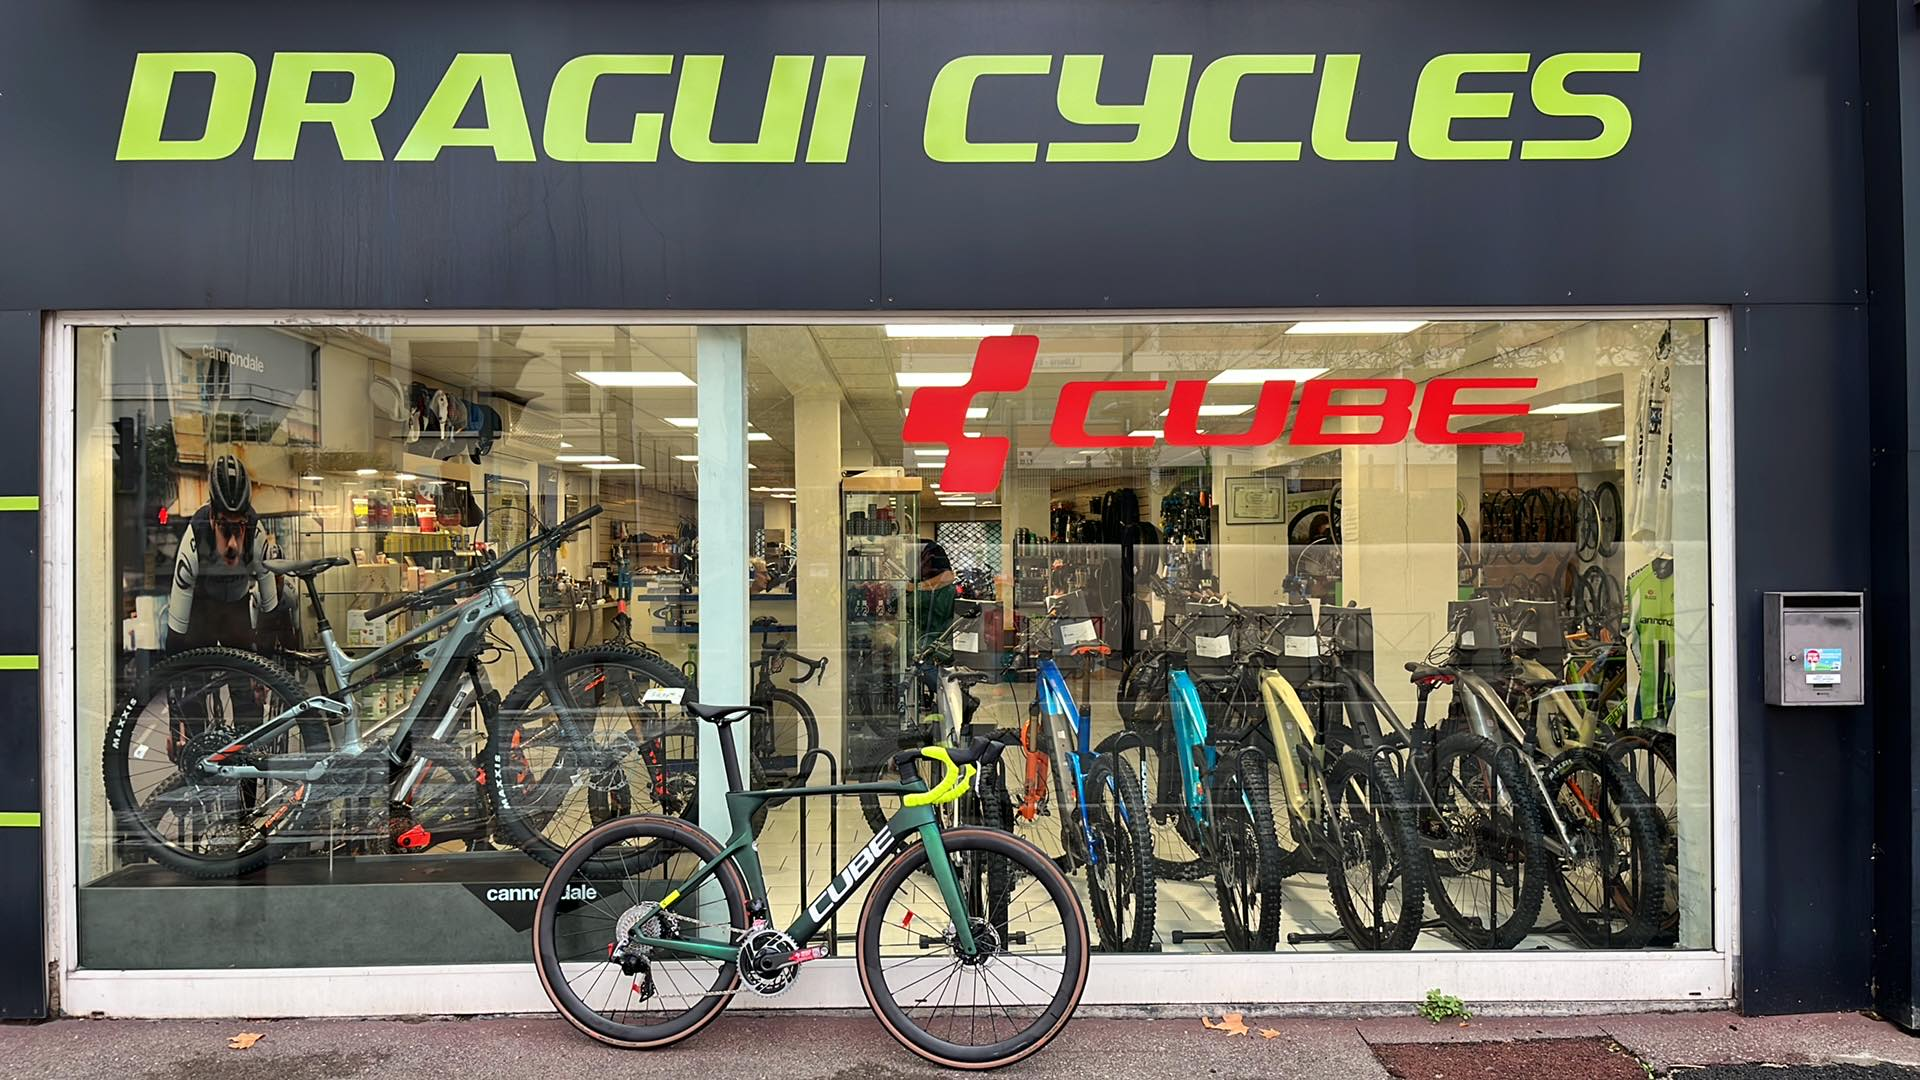 Dragui cycles